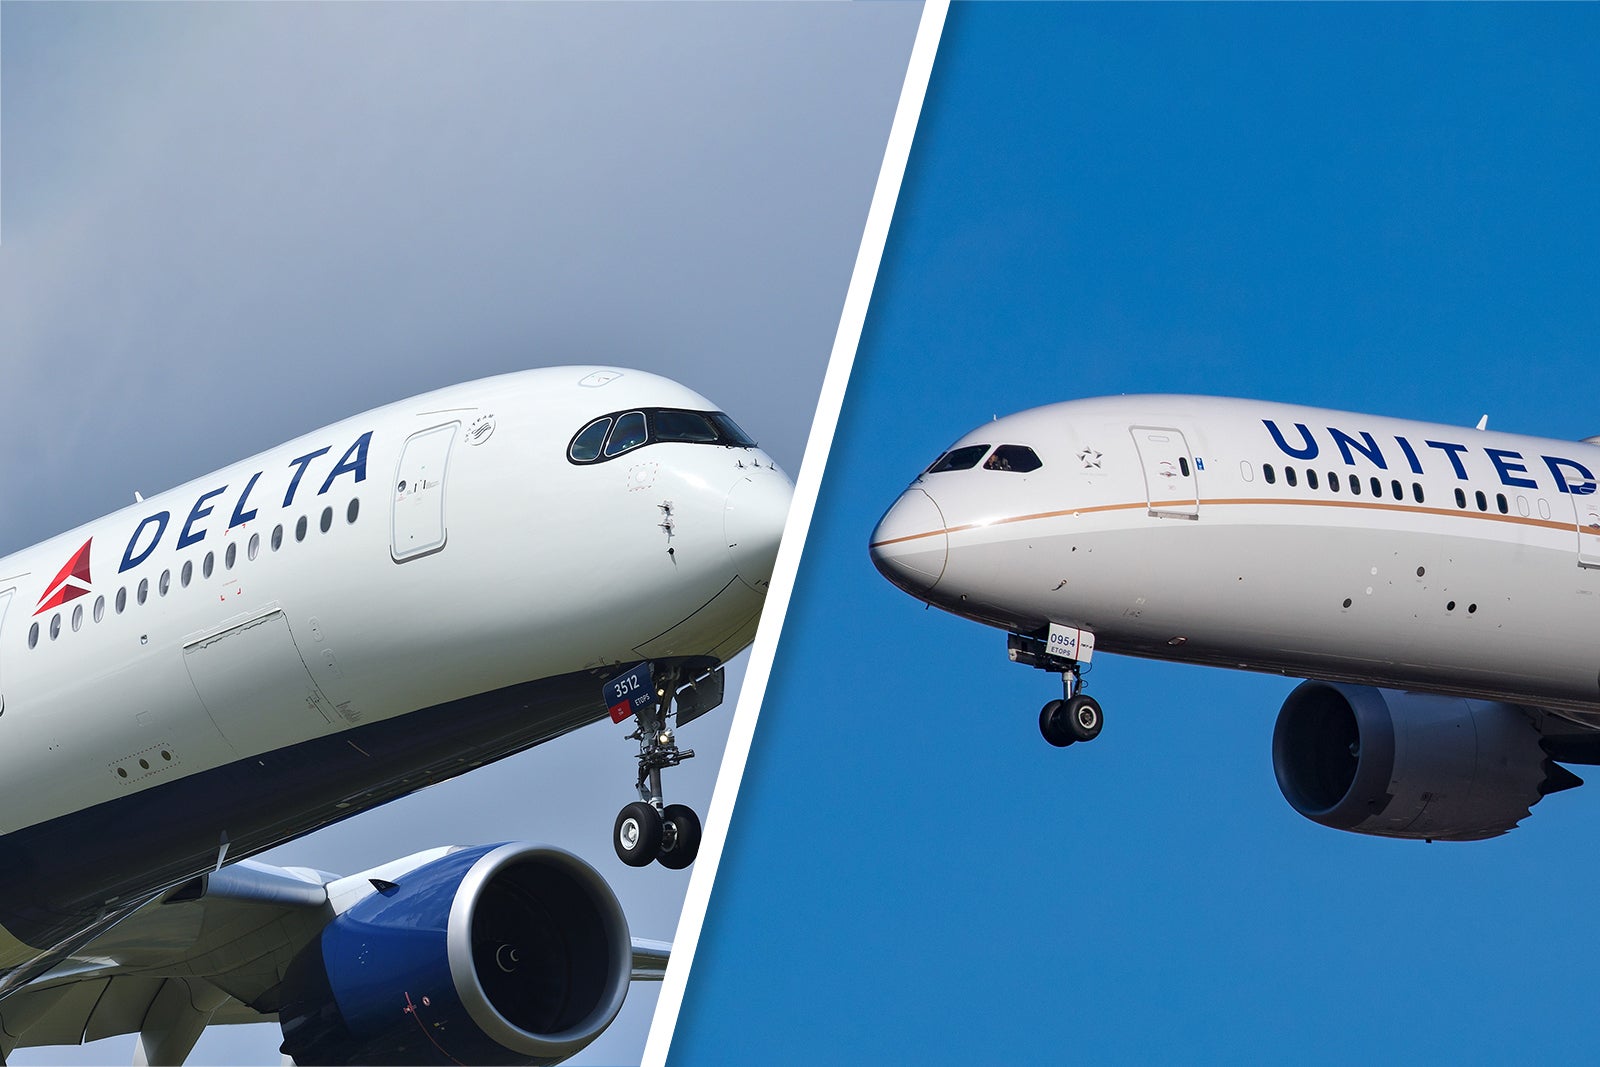 United and Delta planes